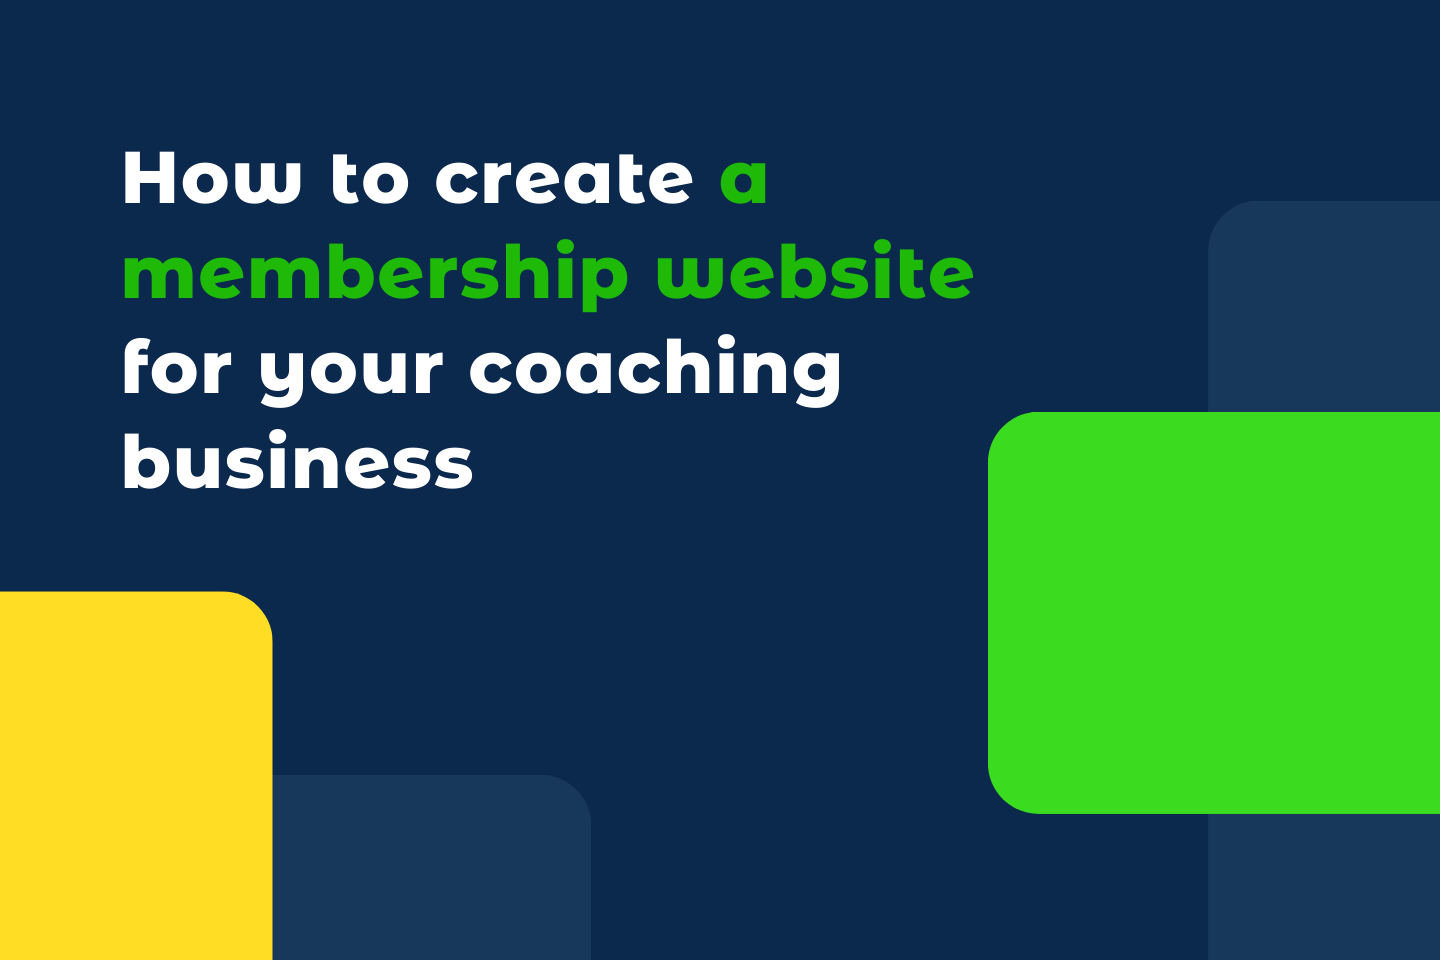 How to create a membership website for your coaching business